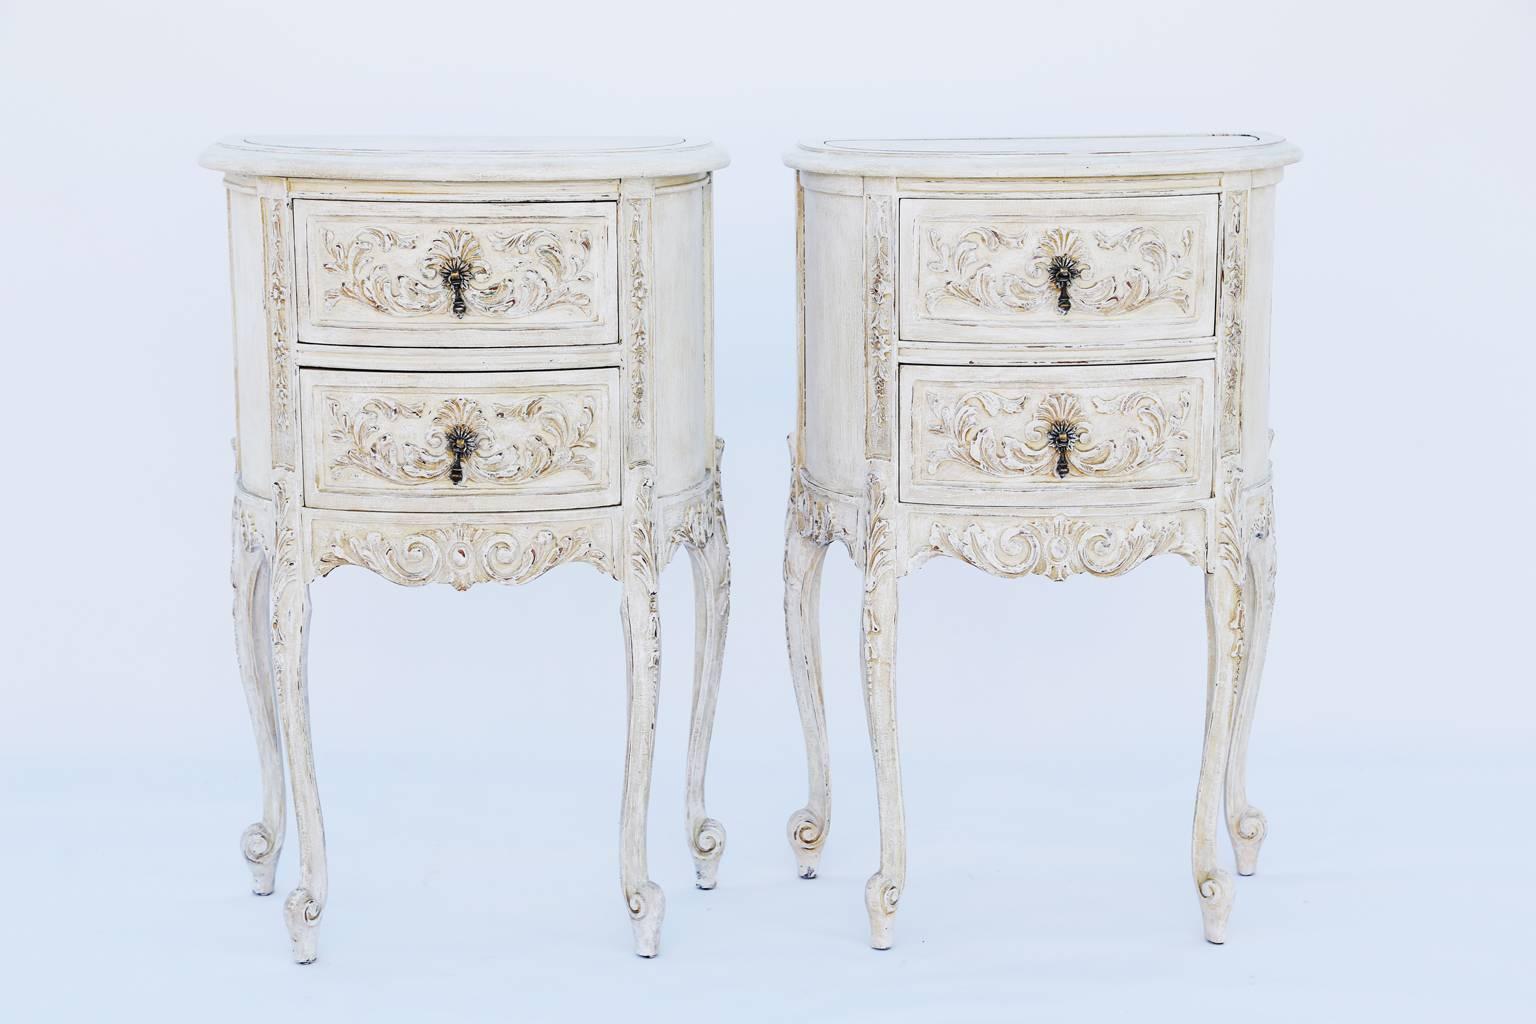 Pair of bedside commodes, in the Louis XV style, each chest having a demilune top inset with antiqued mirror, with molded edge, on two stacked drawers, carved with a palmette and scrolling acanthus, flanked by foliate-carved stiles, on similarly